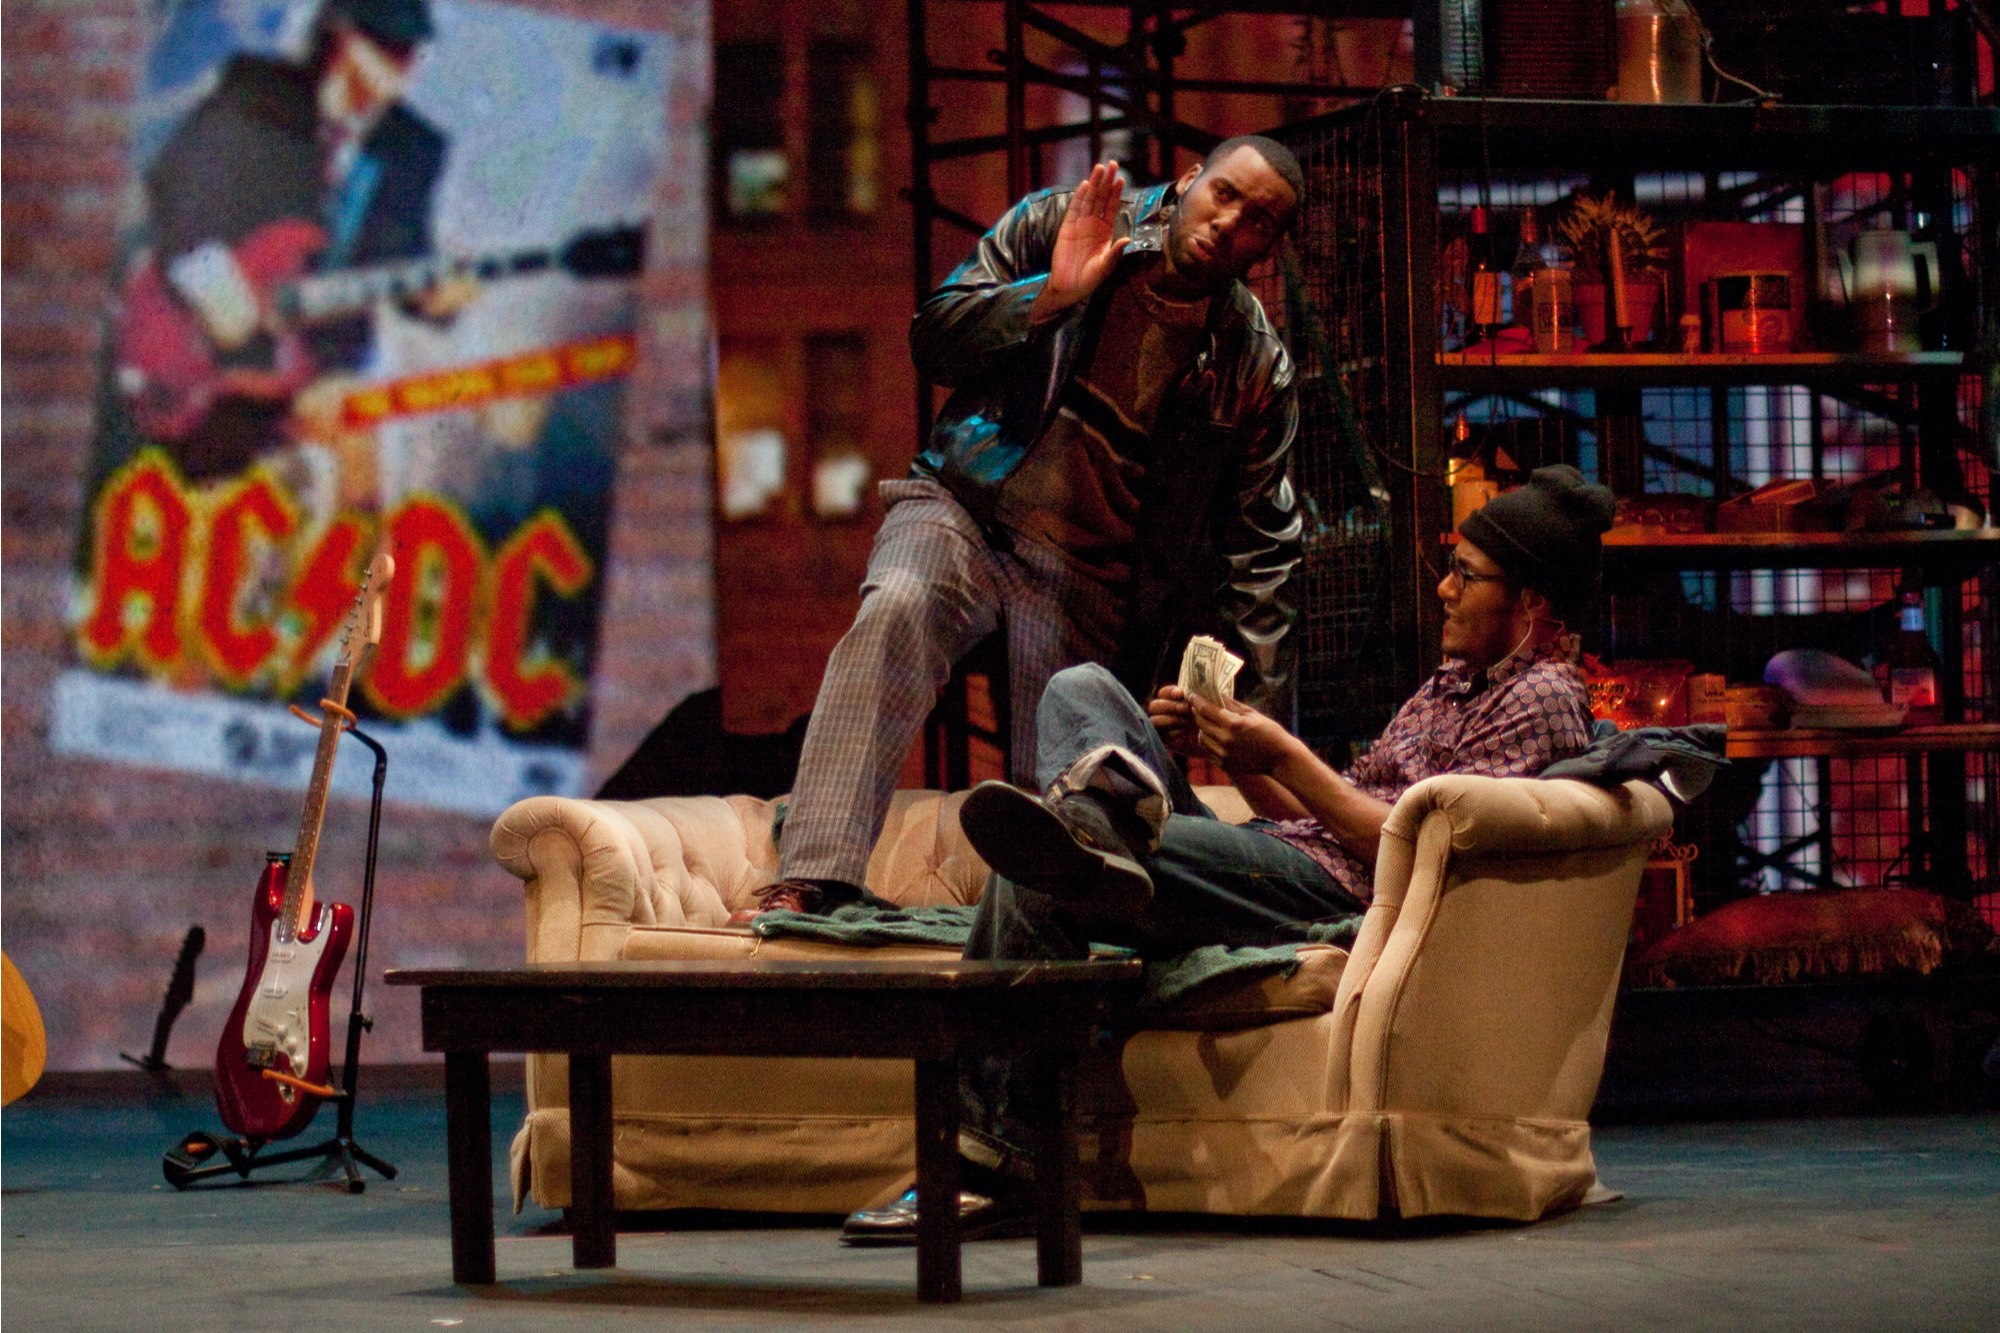 Students in the department of Music, Theatre, and Dance perform the musical Rent